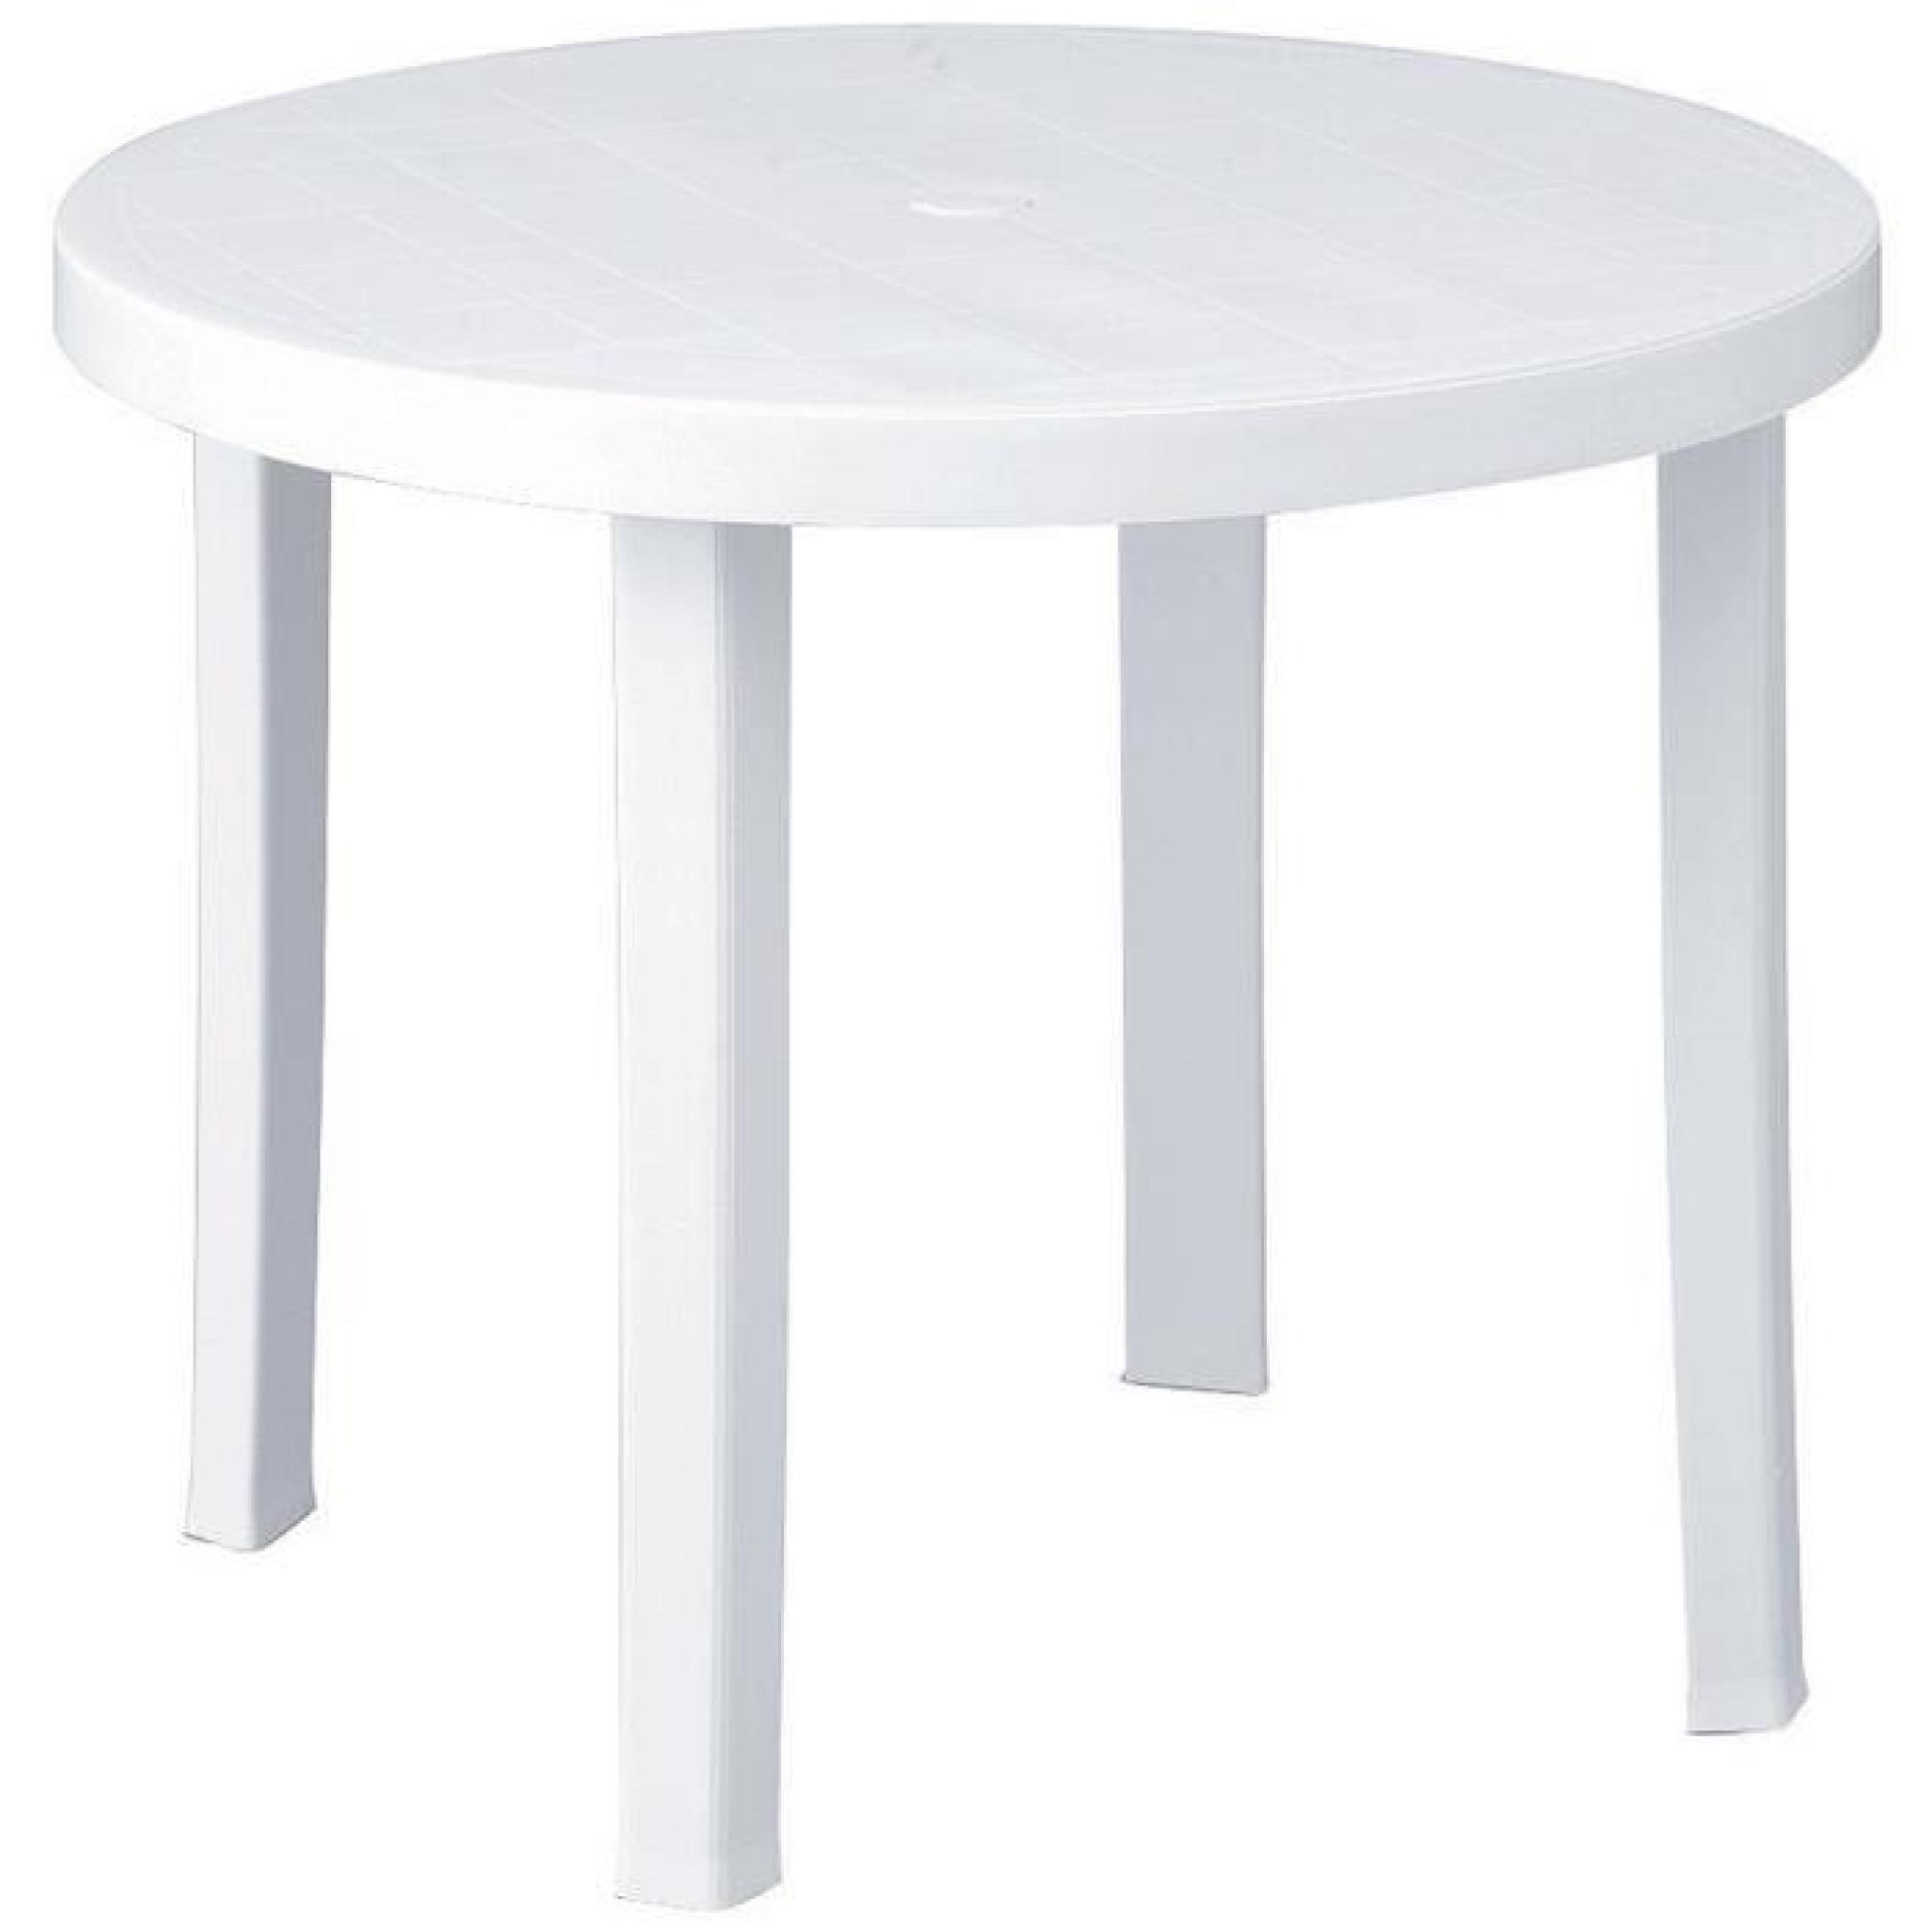 TABLE RONDE 90 CM